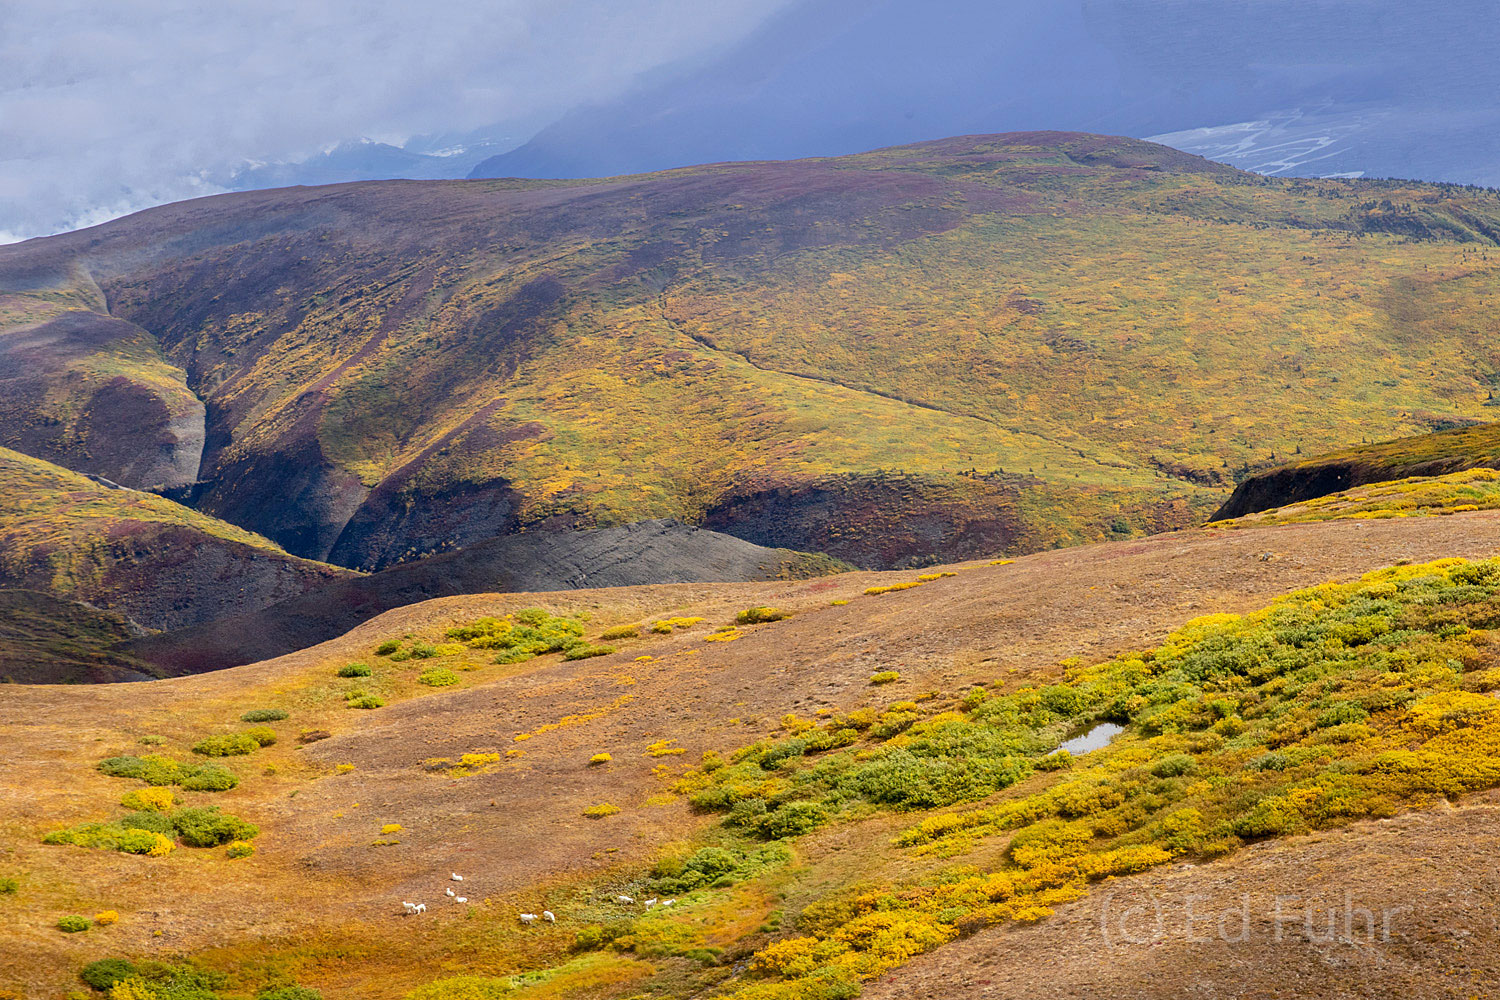 Fall's colors are as spectacular as the season is short on these mountain ridges below the snow and ice line, as a small herd...